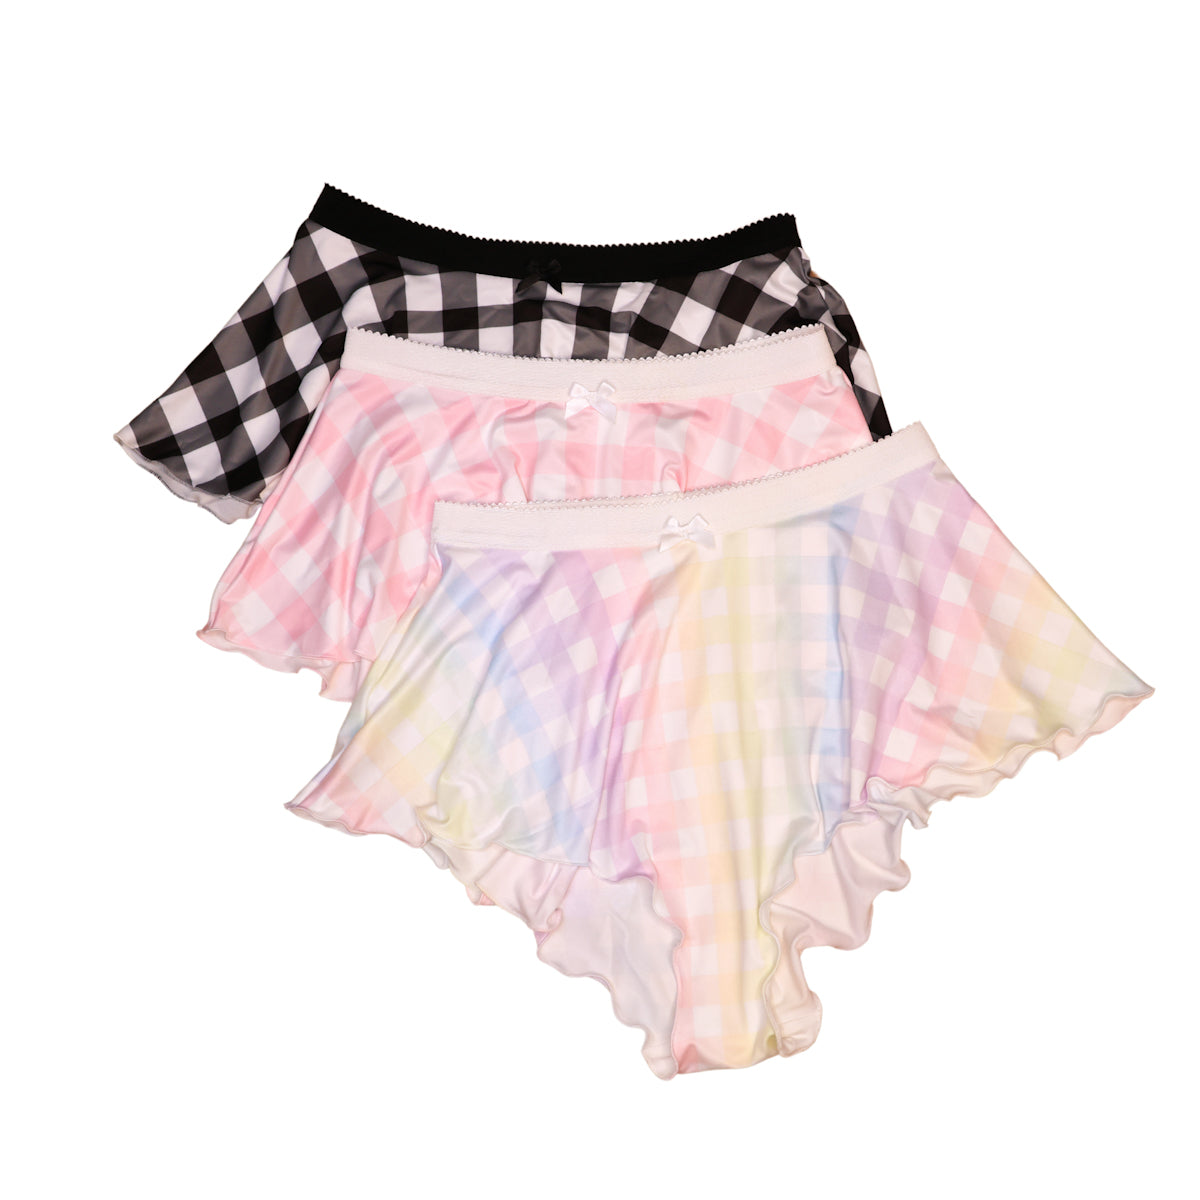 Tall French Knicker Trio - Black Gingham, Pink Gingham, Rainbow Gingham